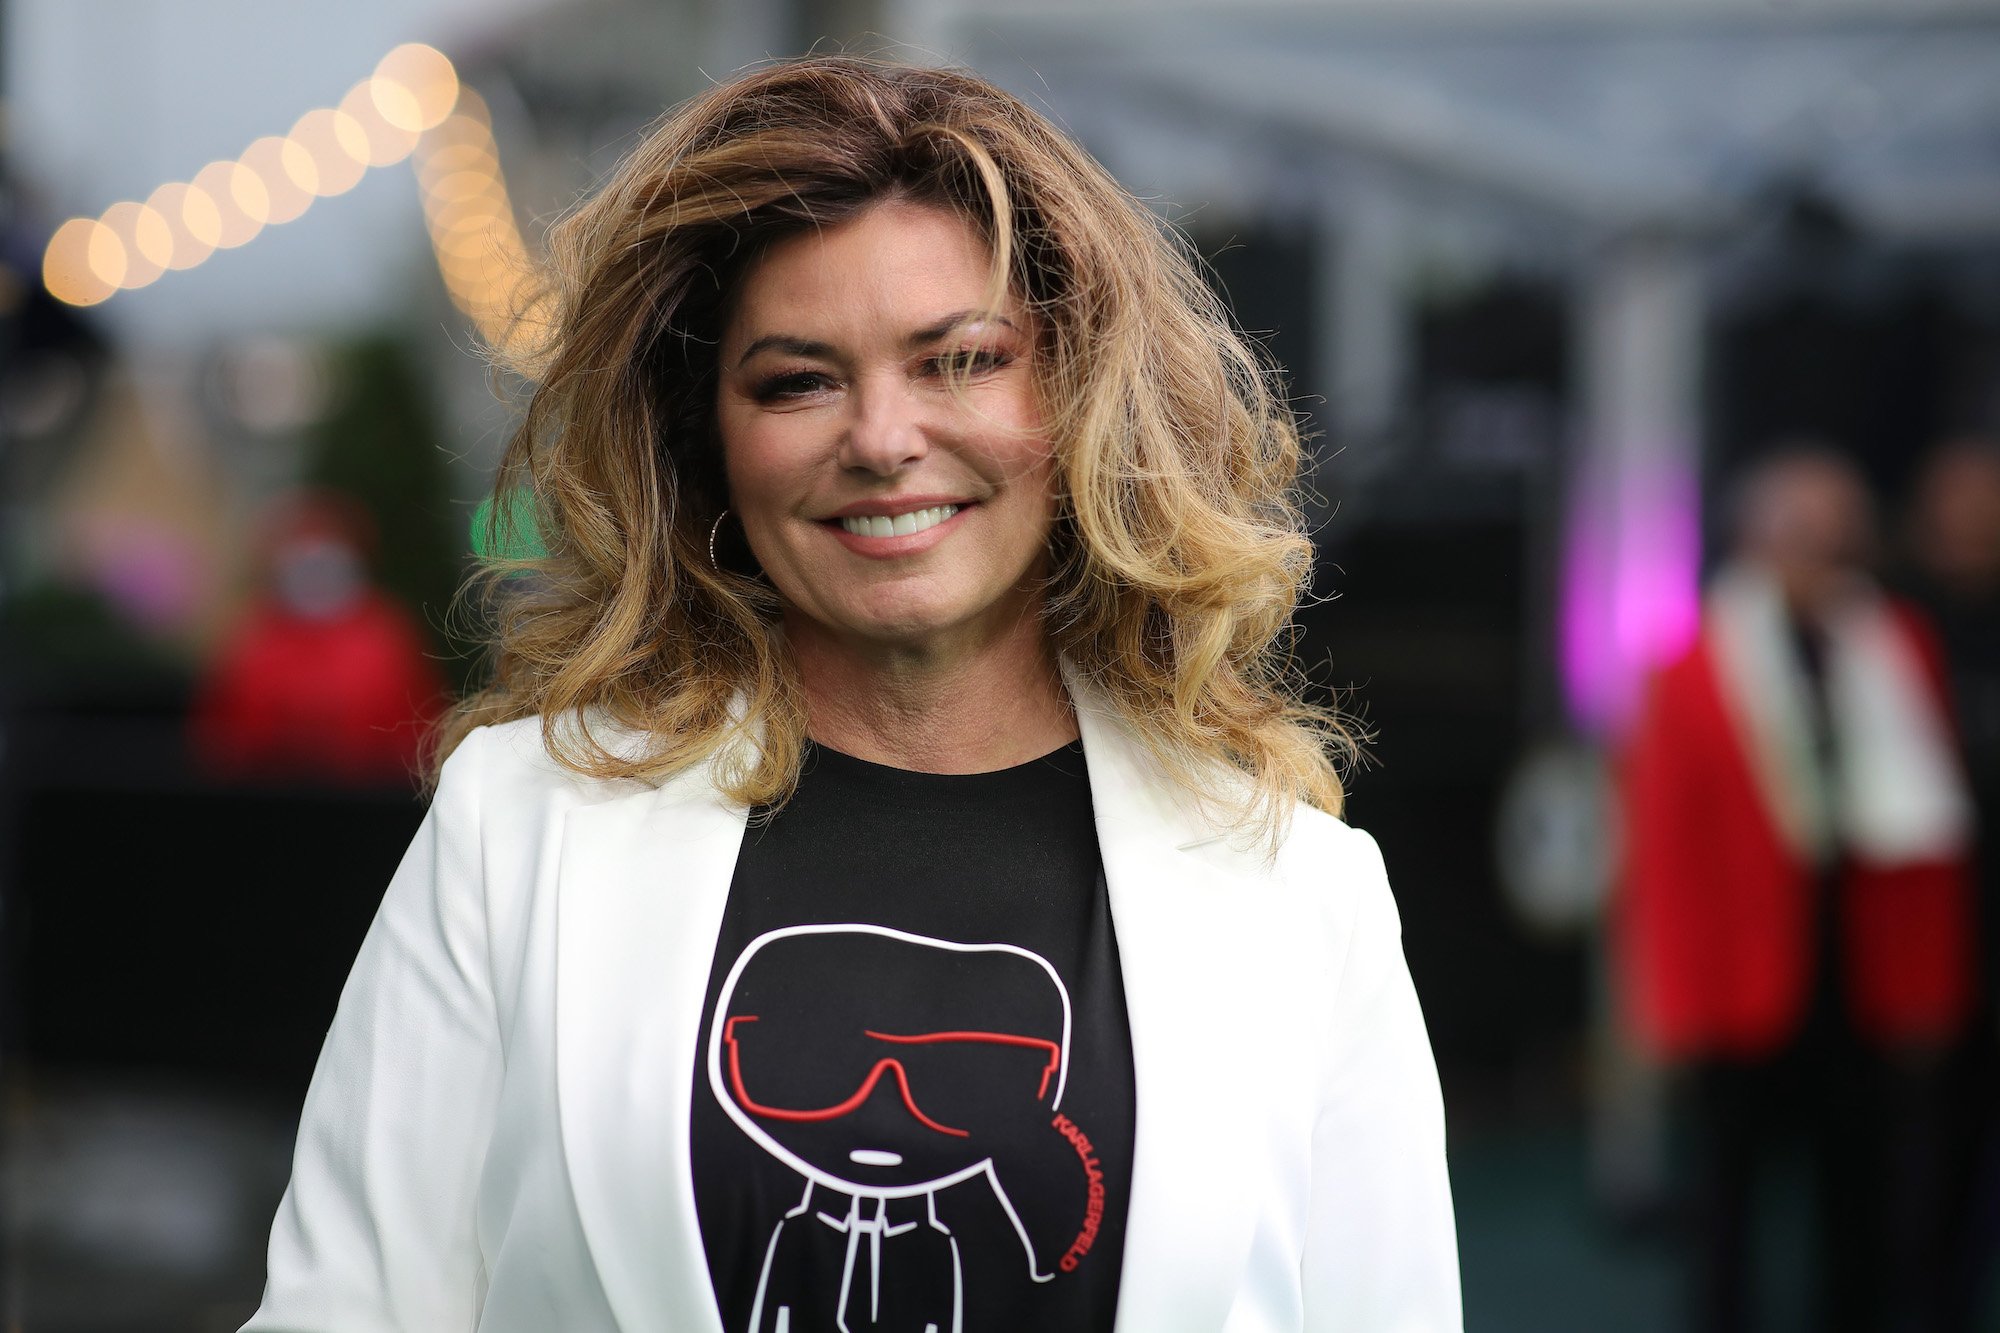 Shania Twain, who was once called 'America's Best Paid Lap Dancer', wearing a white jacket and black T-shirt.